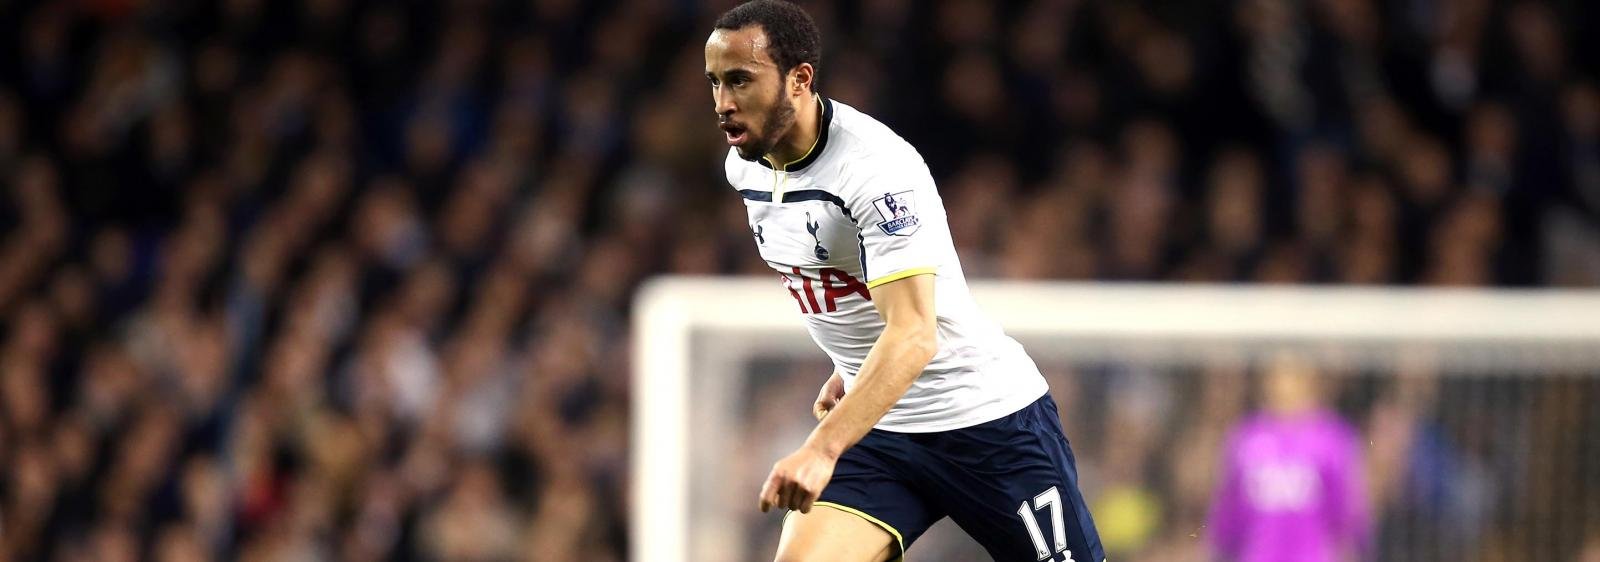 Are Spurs right to sell Townsend?